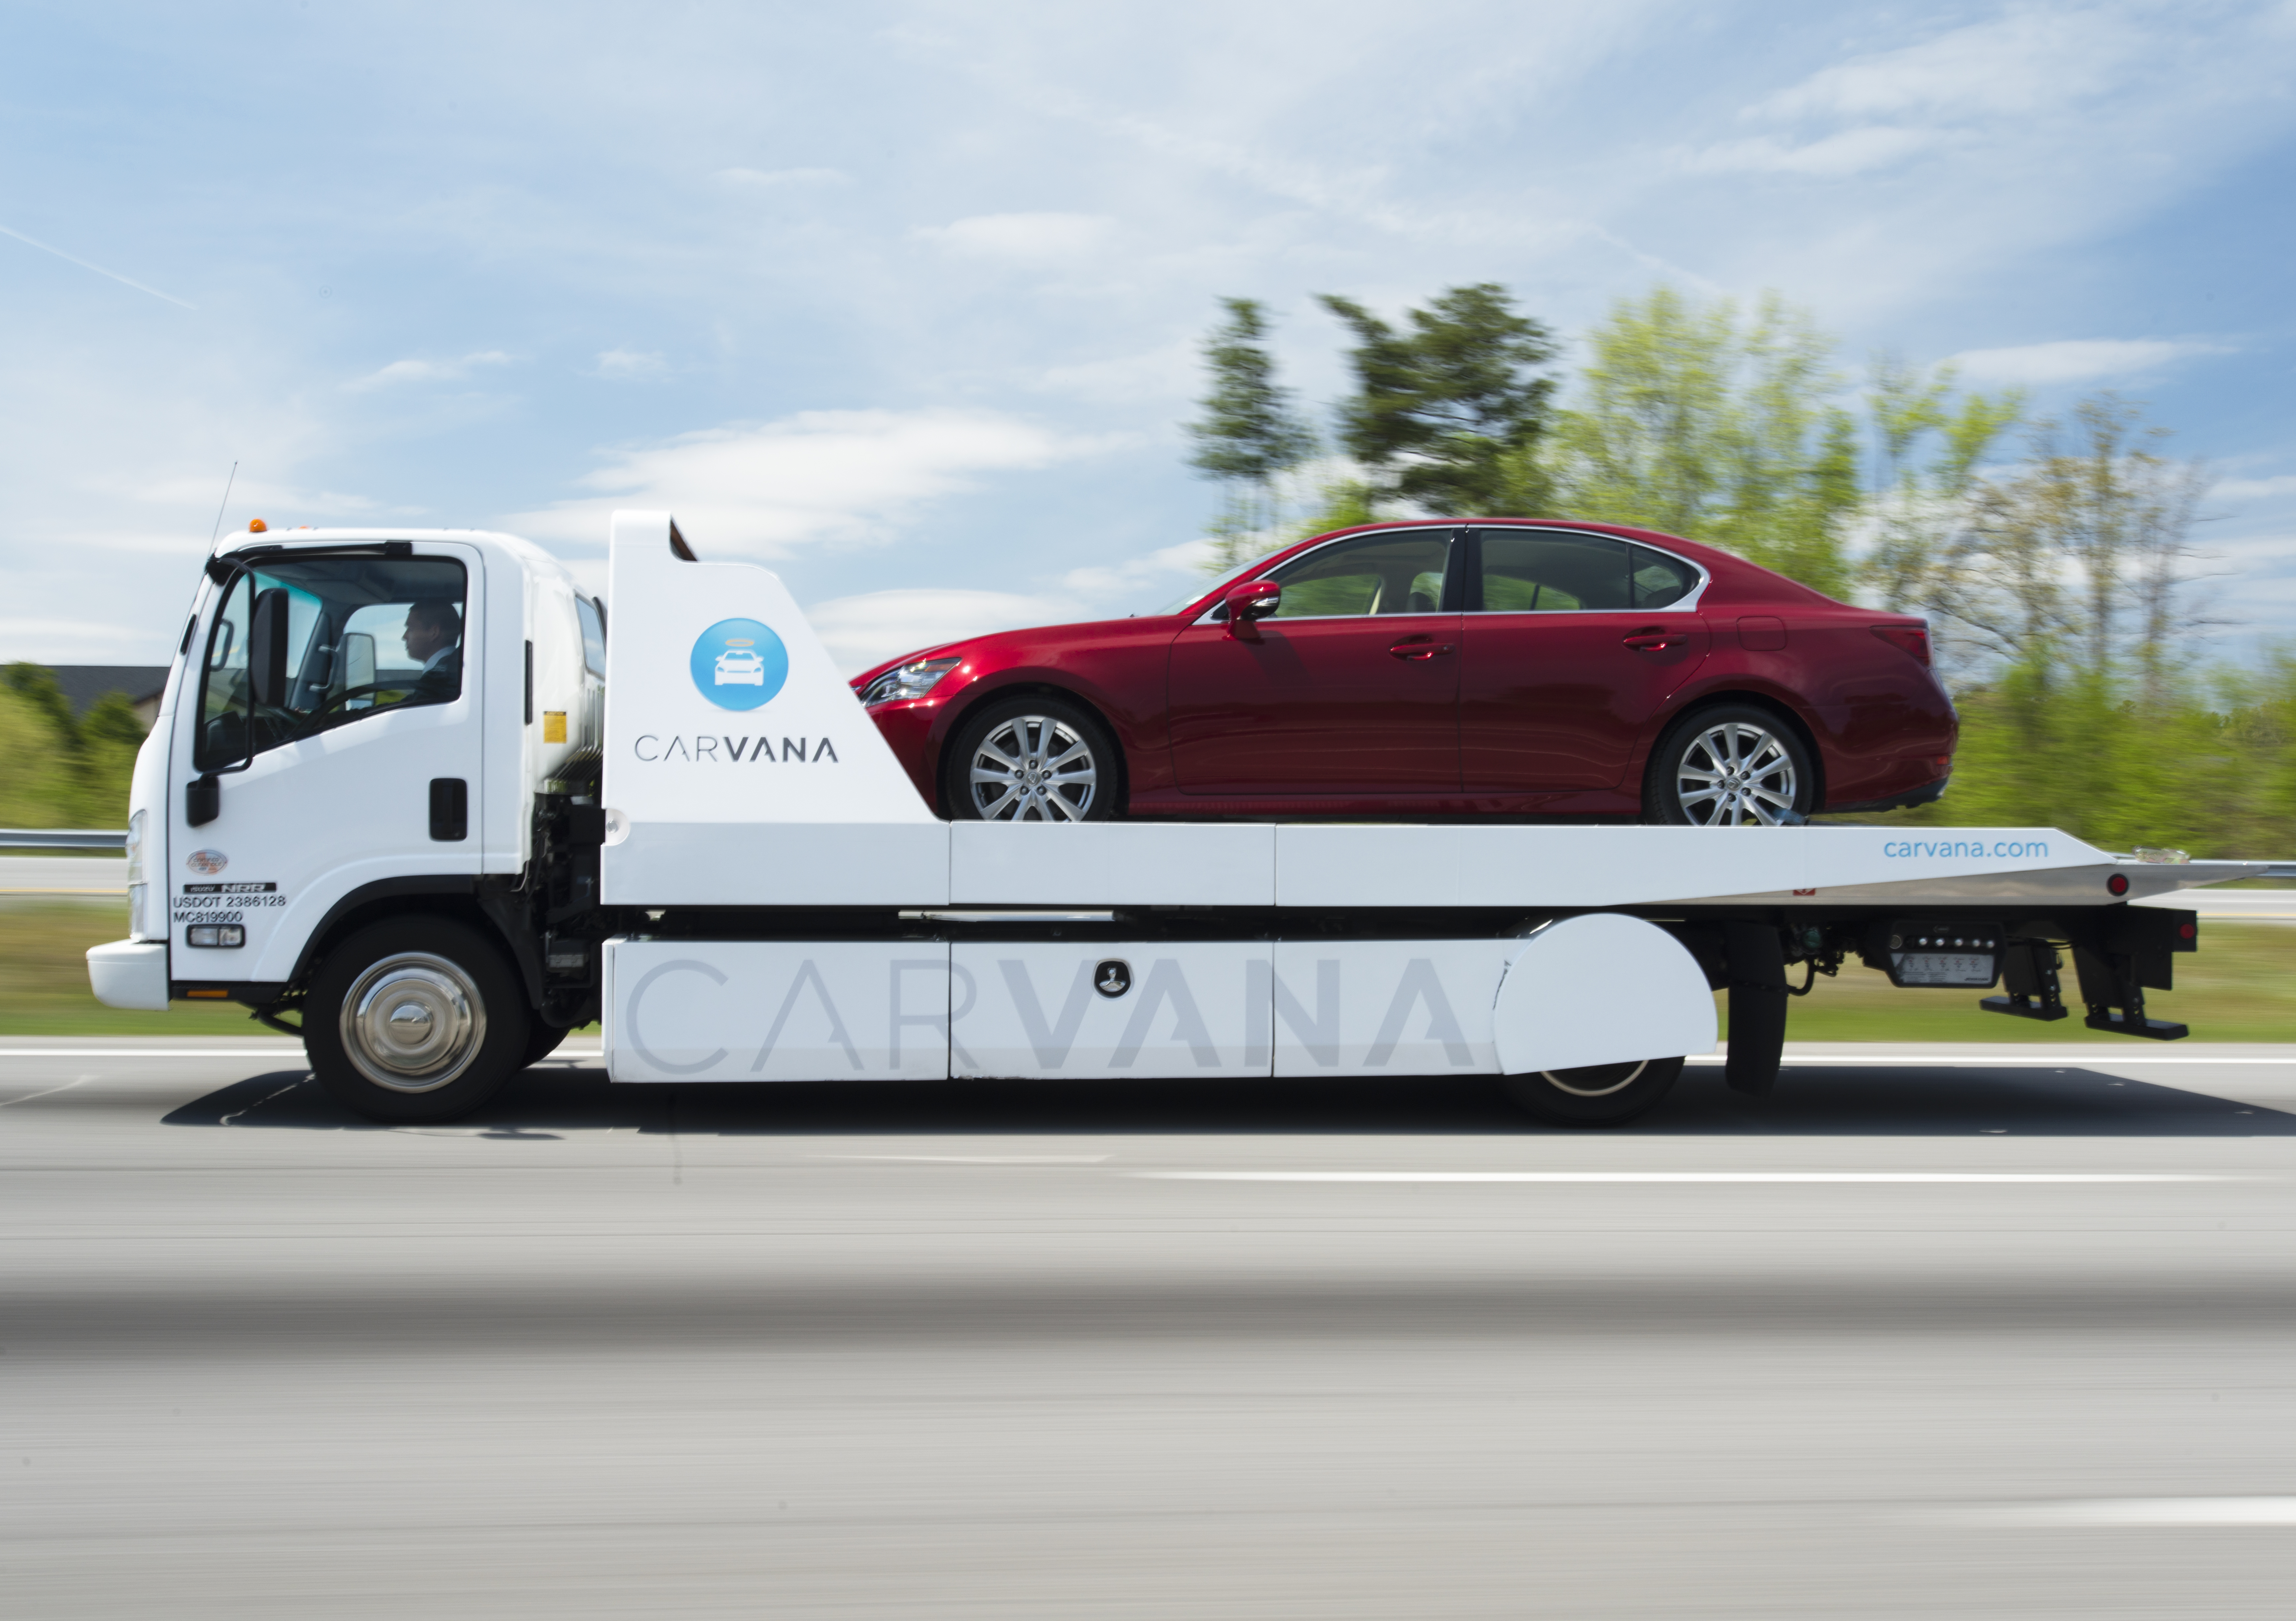 What is the oldest car that Carvana will buy?